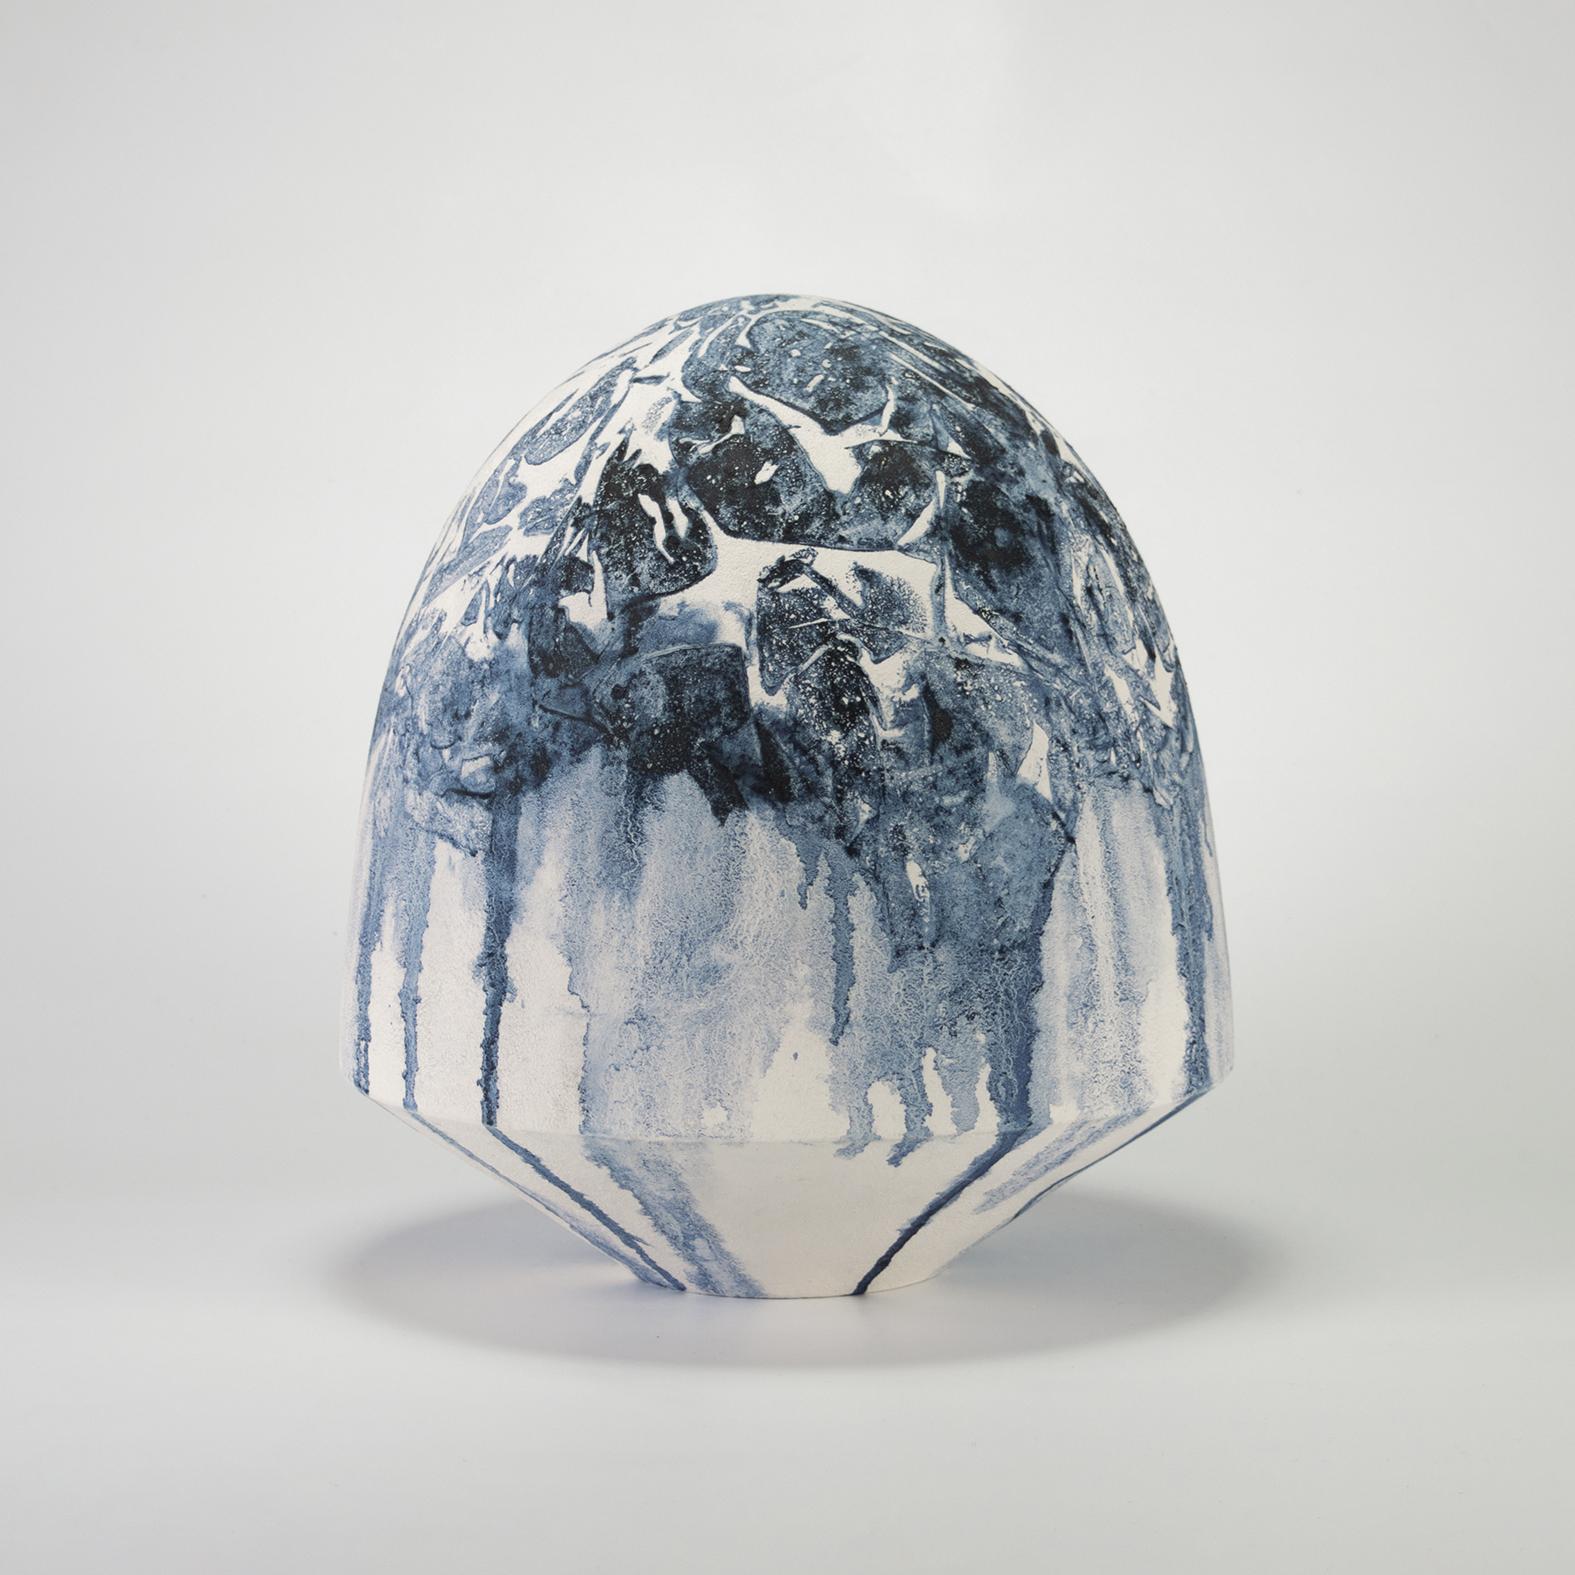 Simone Negri was born in Milan in 1970. He graduated from the Istituto Statale d’Arte of Castelmassa and then deepened his research in the field of artistic ceramics by attending workshops and following numerous seminars. It develops its own